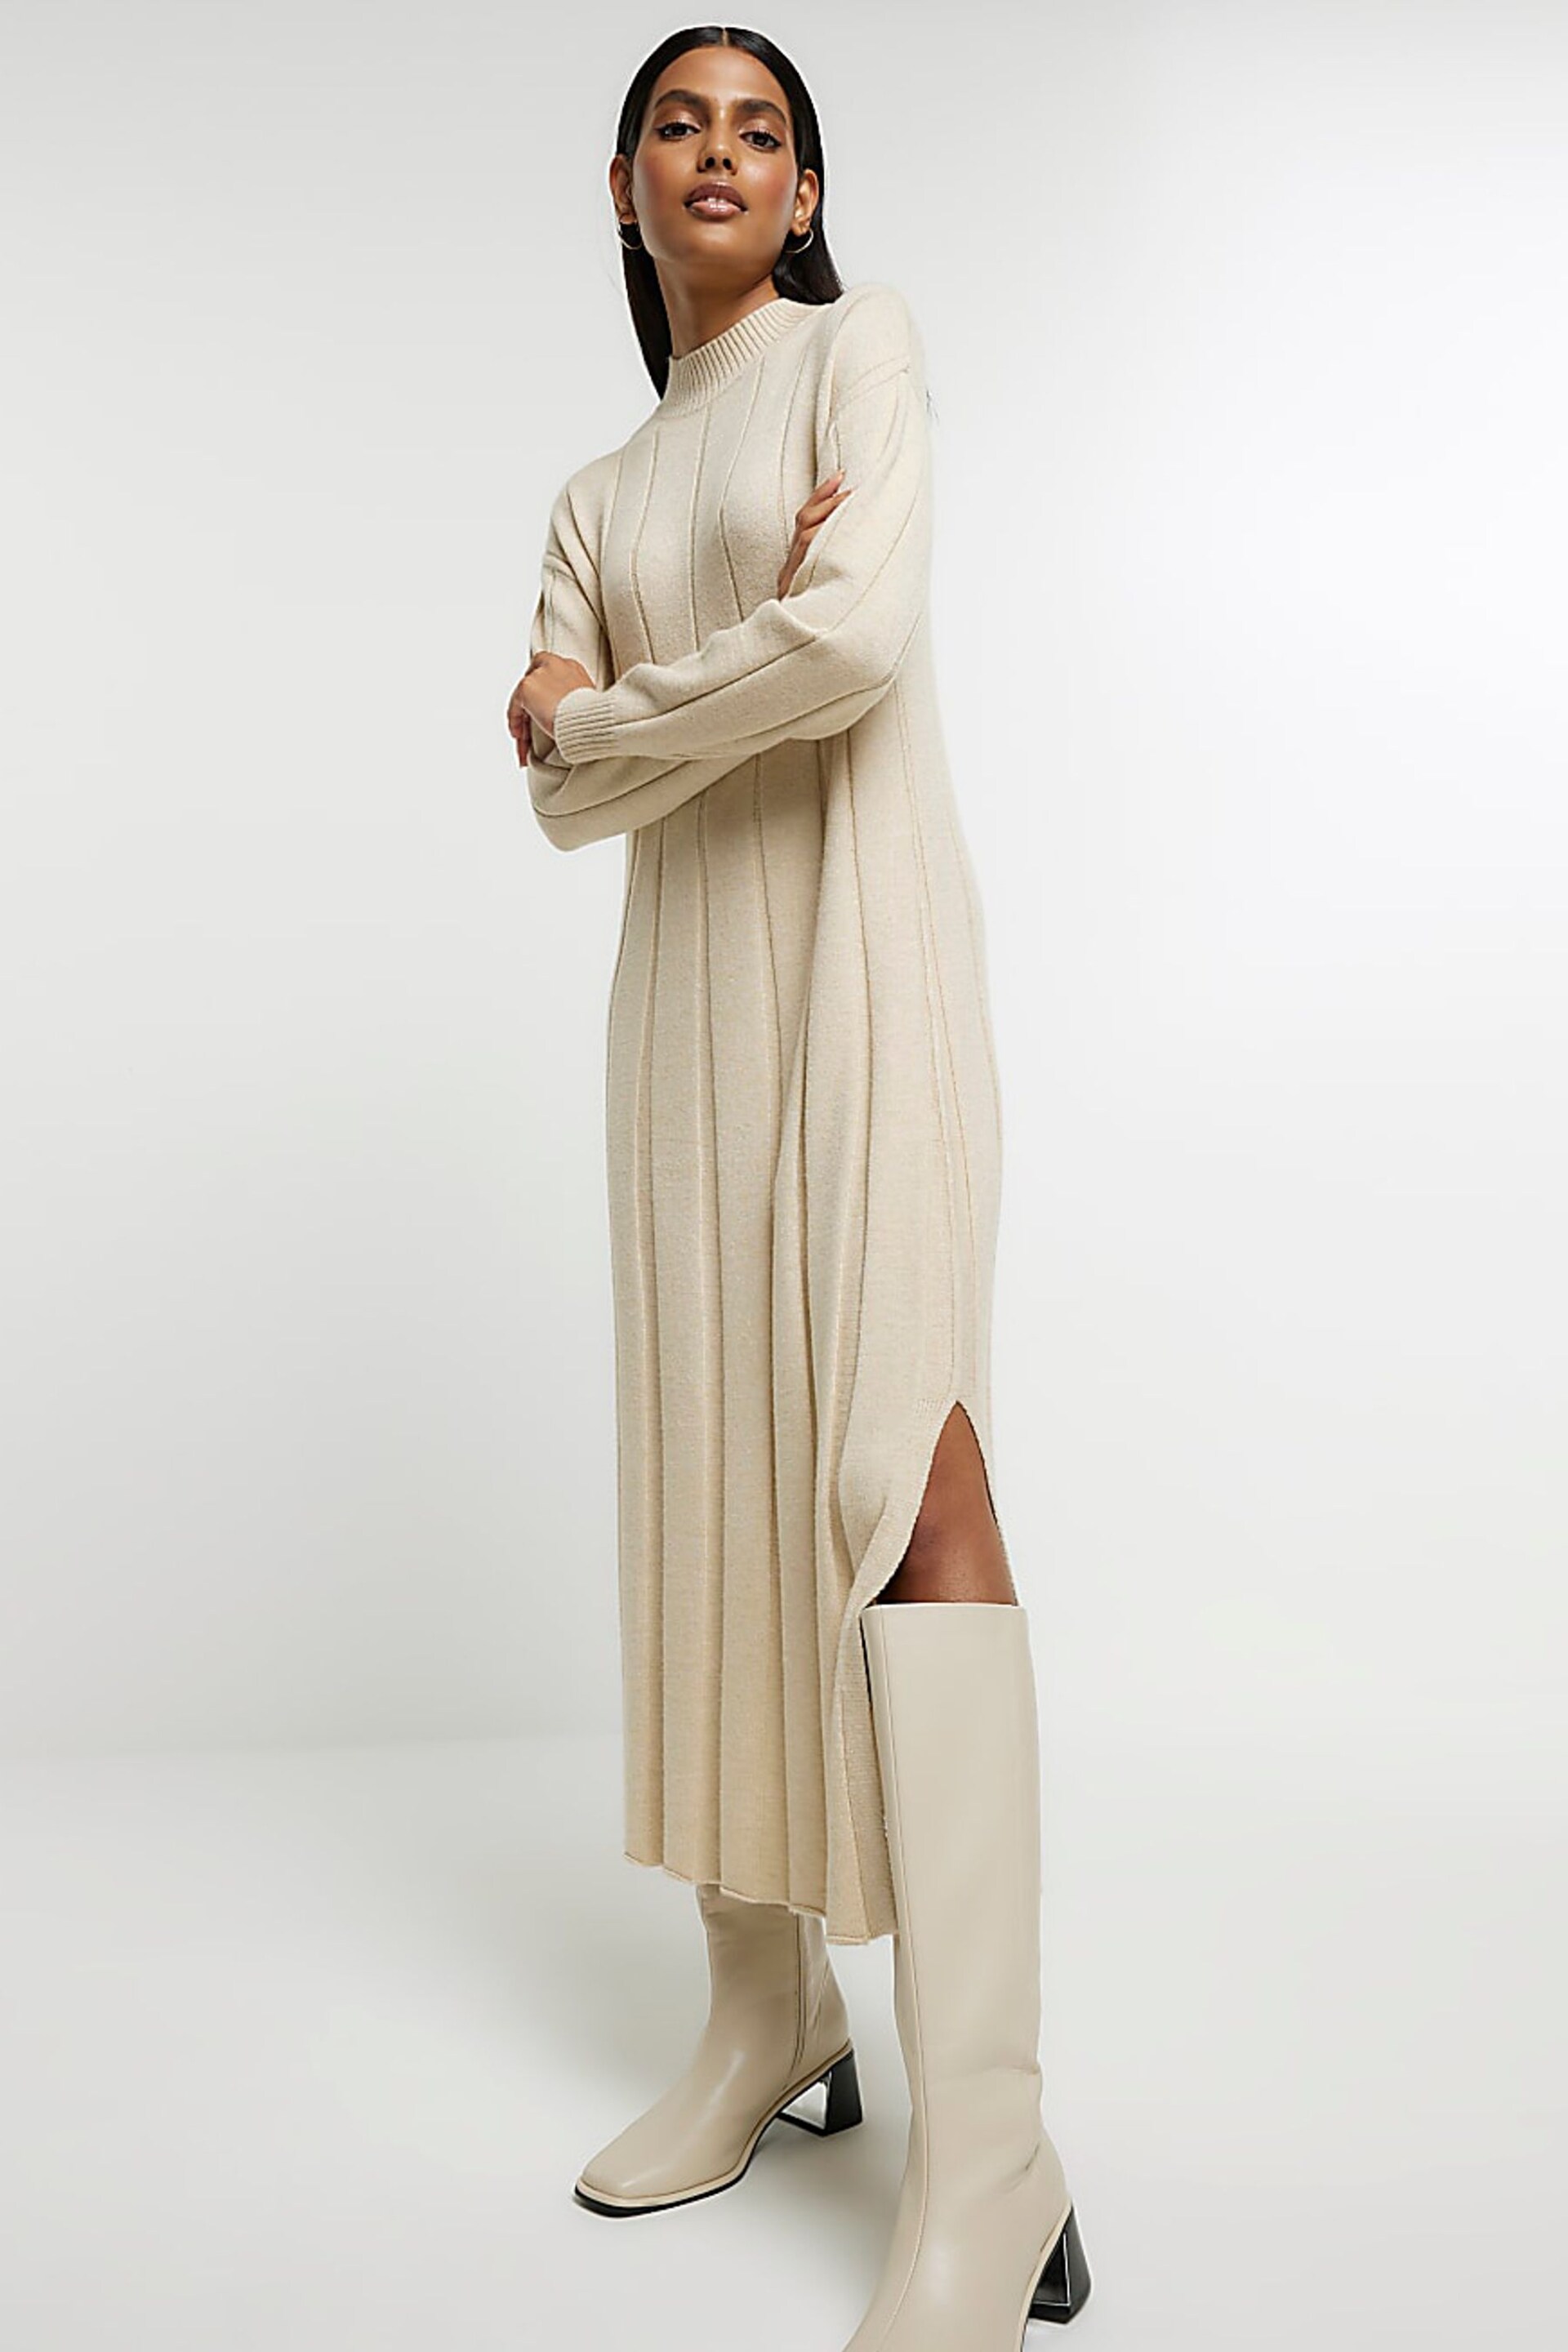 River Island Beige High Neck Knitted Maxi Dress - Image 4 of 6